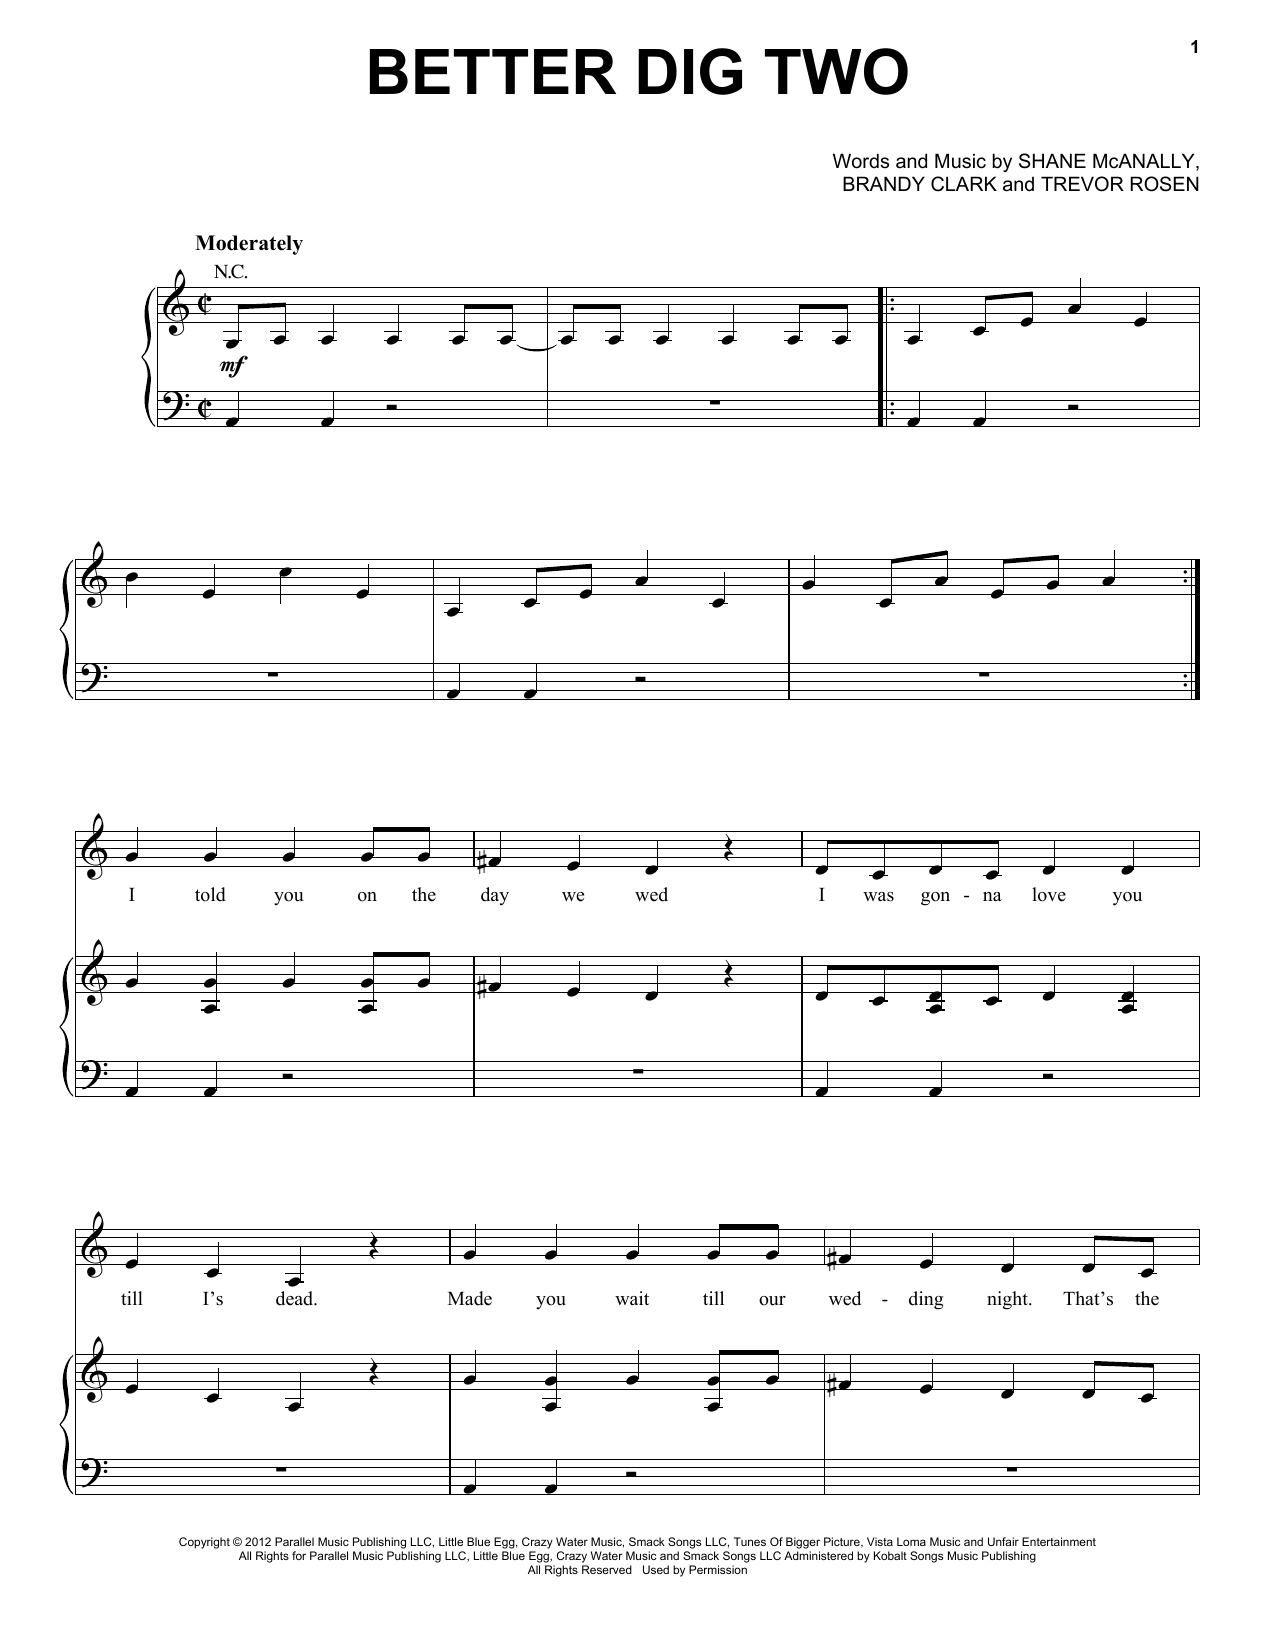 Download The Band Perry Better Dig Two Sheet Music